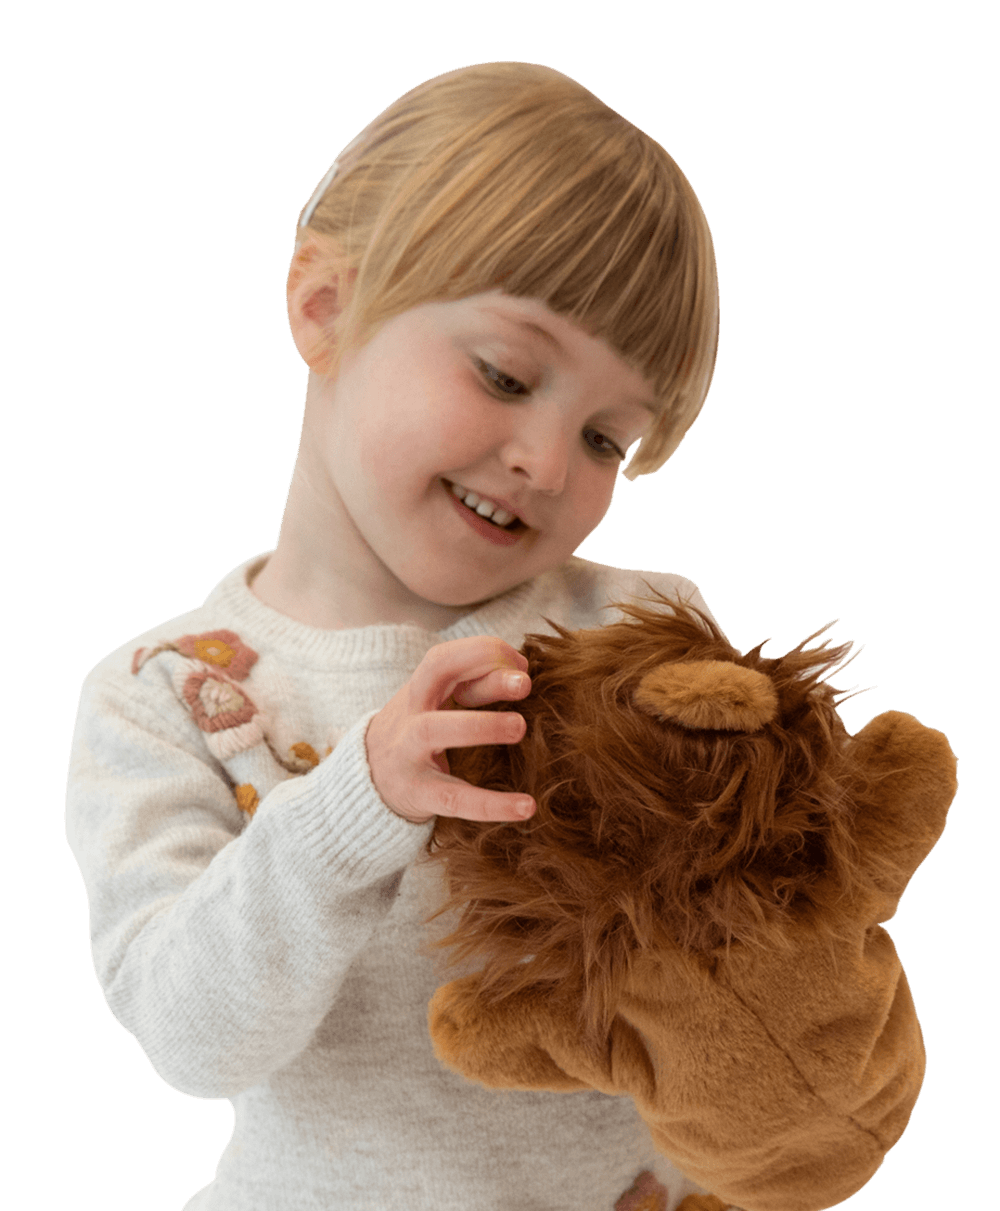 A child playing with a tiger toy